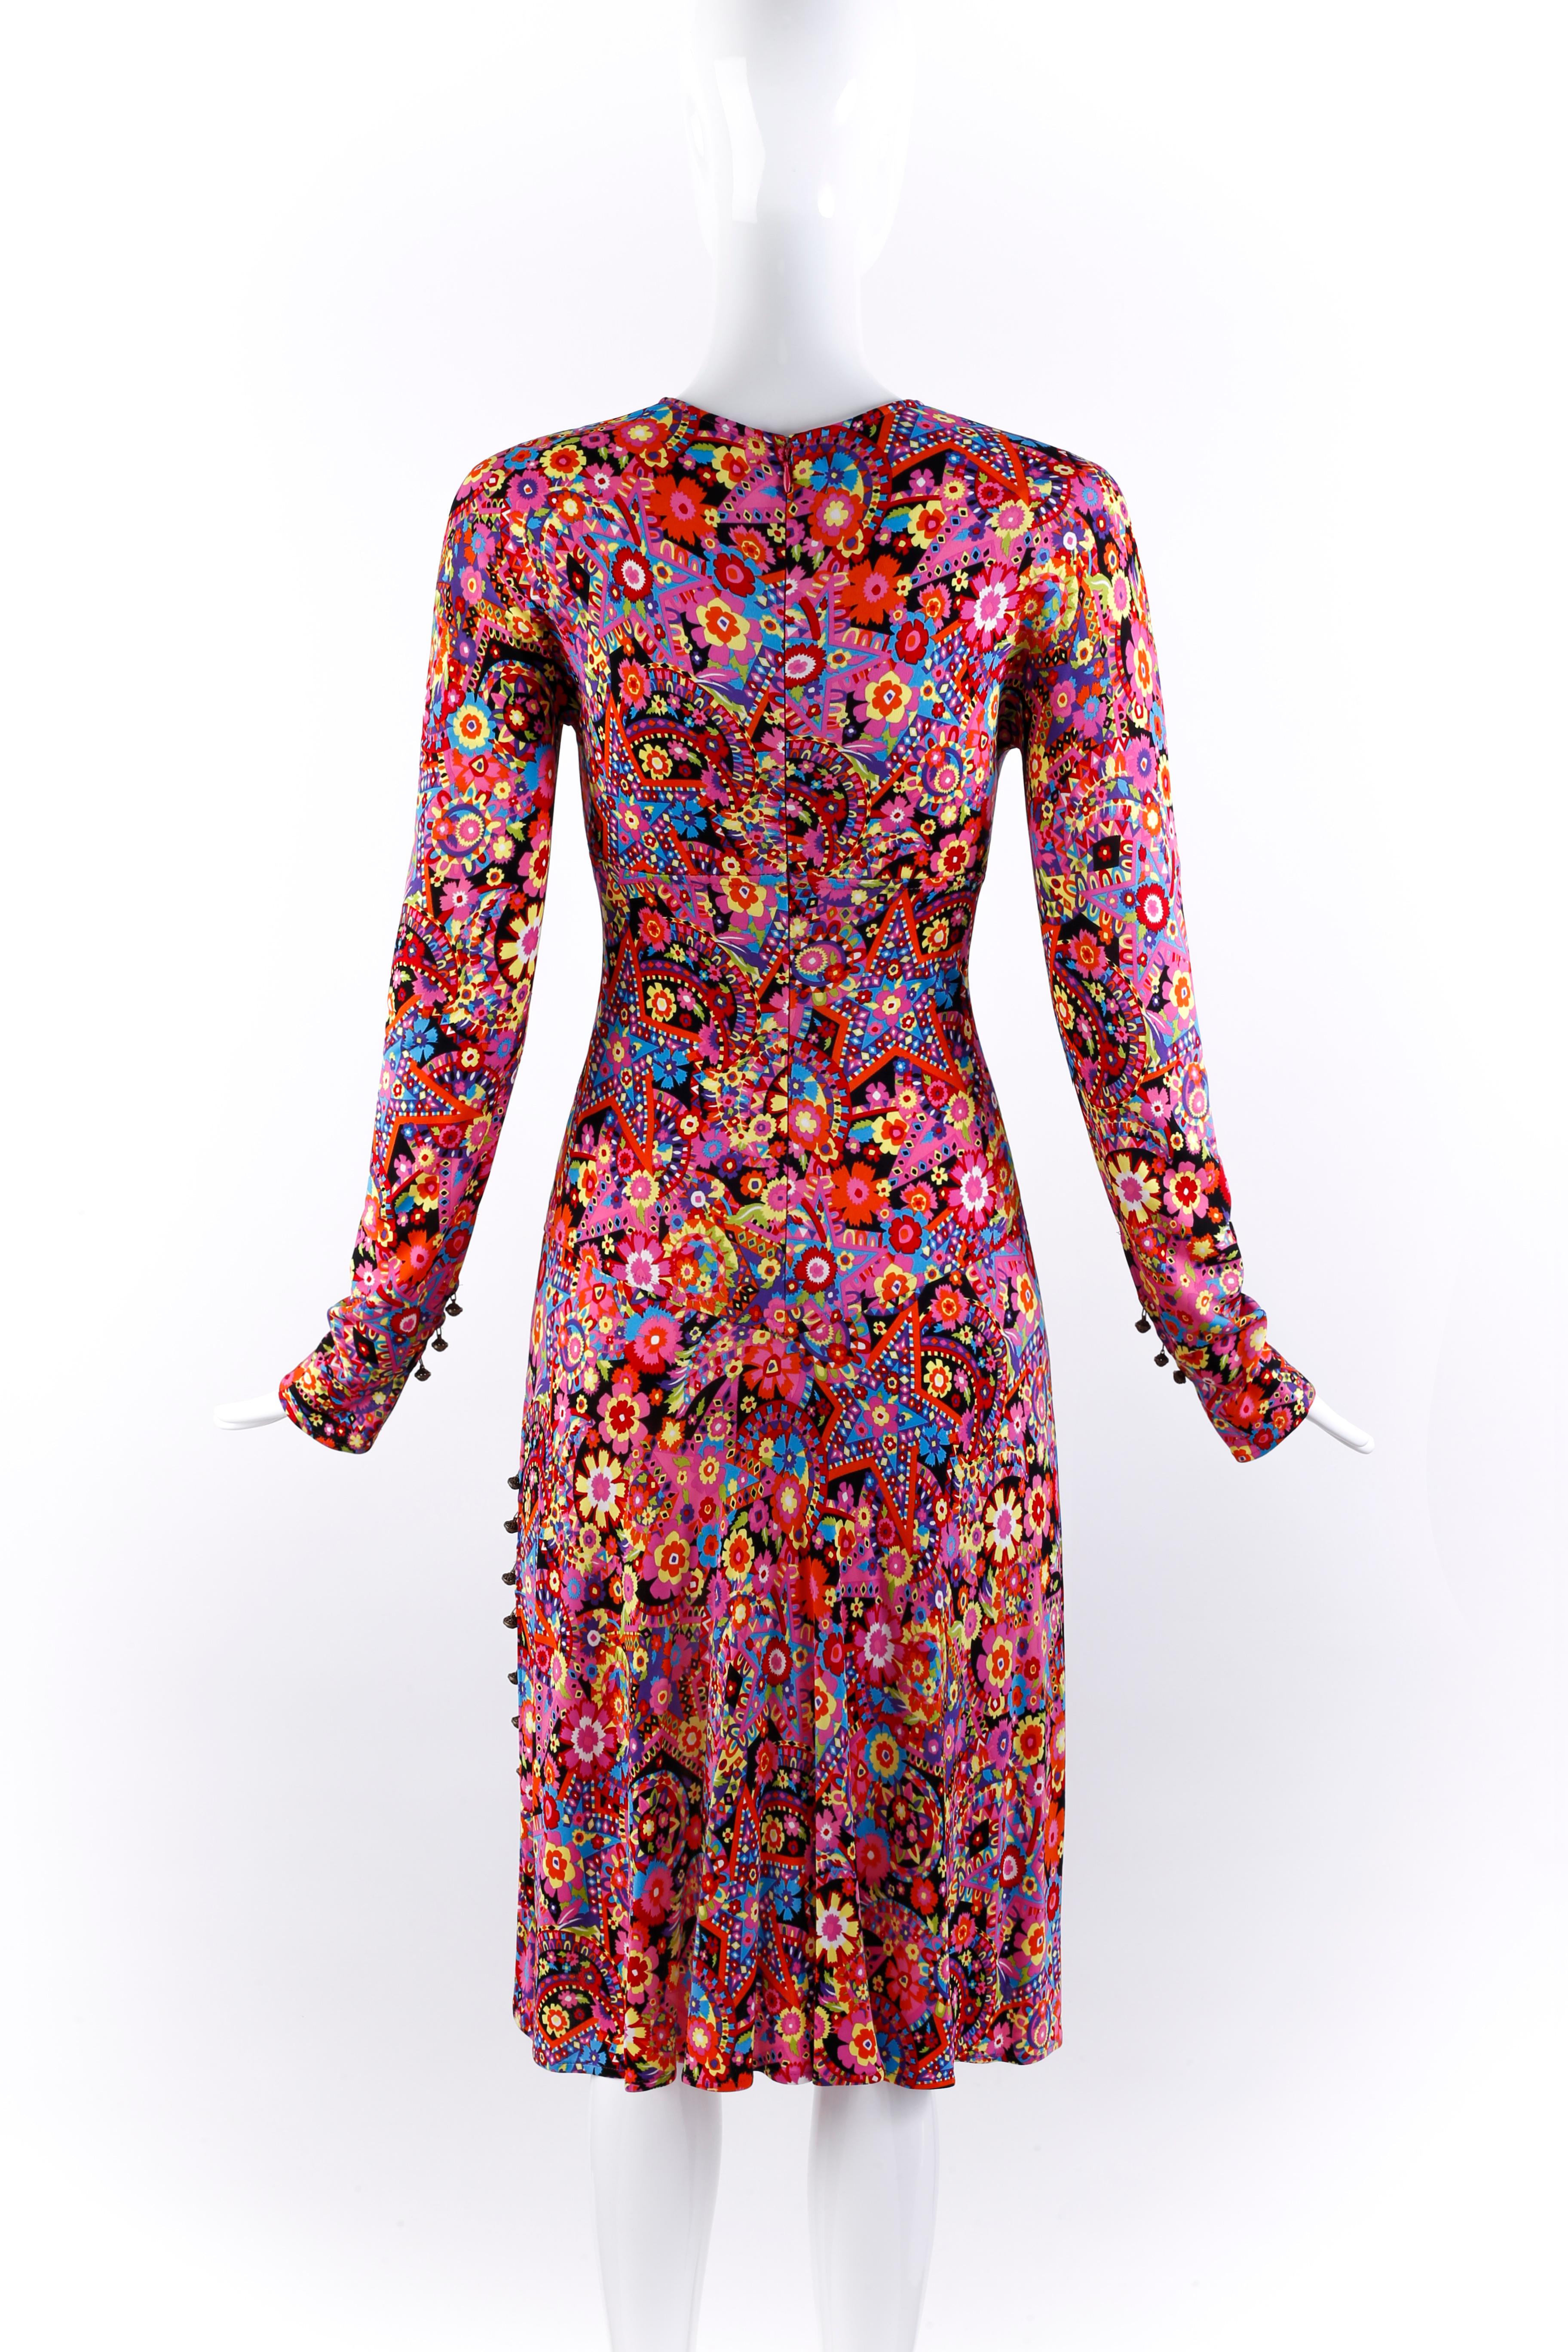 Gianni Versace F/W 2002 Star Flower Collage Print Plunge Neck Fit & Flare Dress For Sale 2